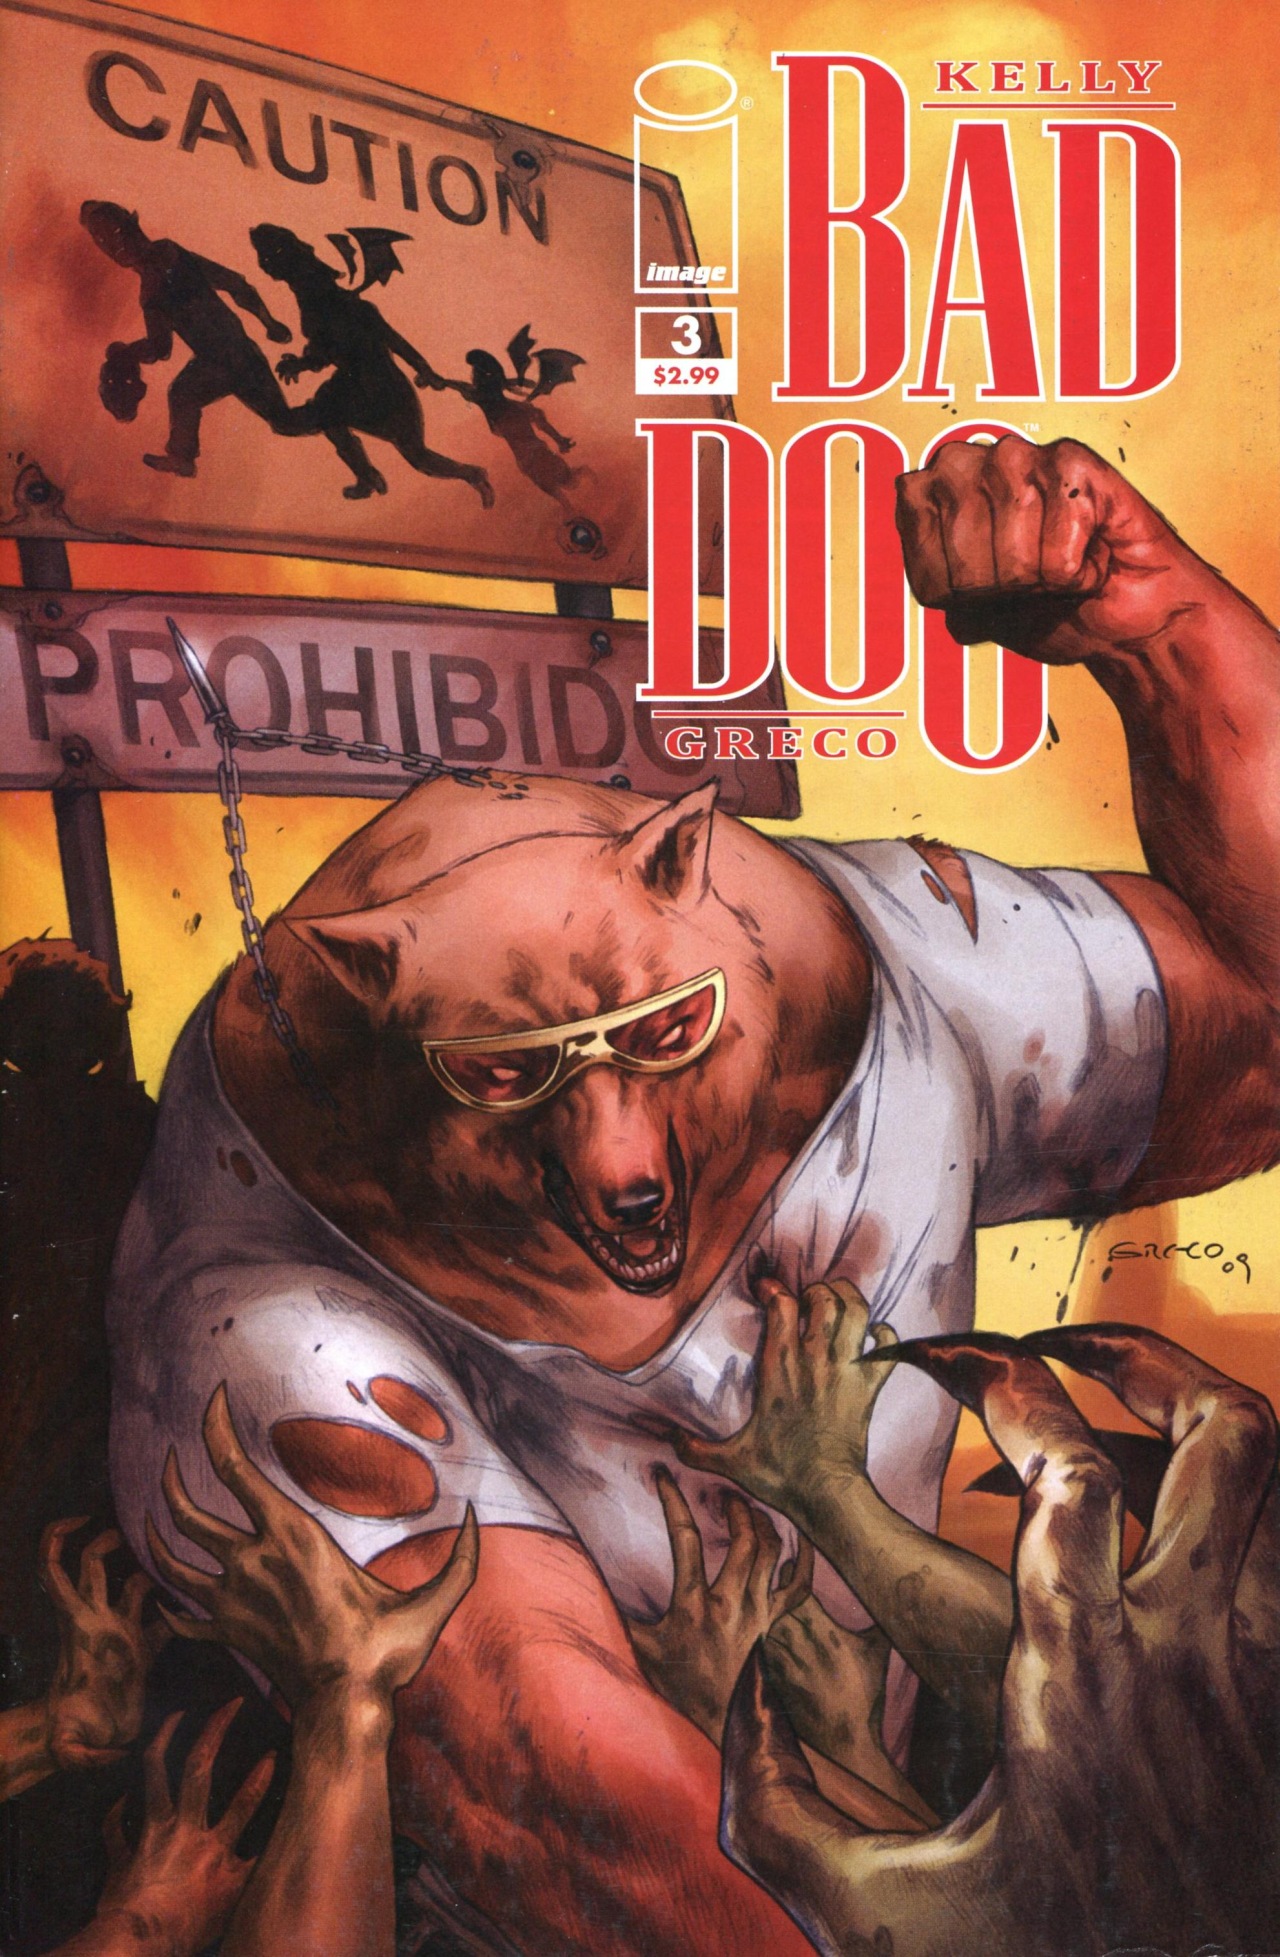 Read online Bad Dog comic -  Issue #3 - 1